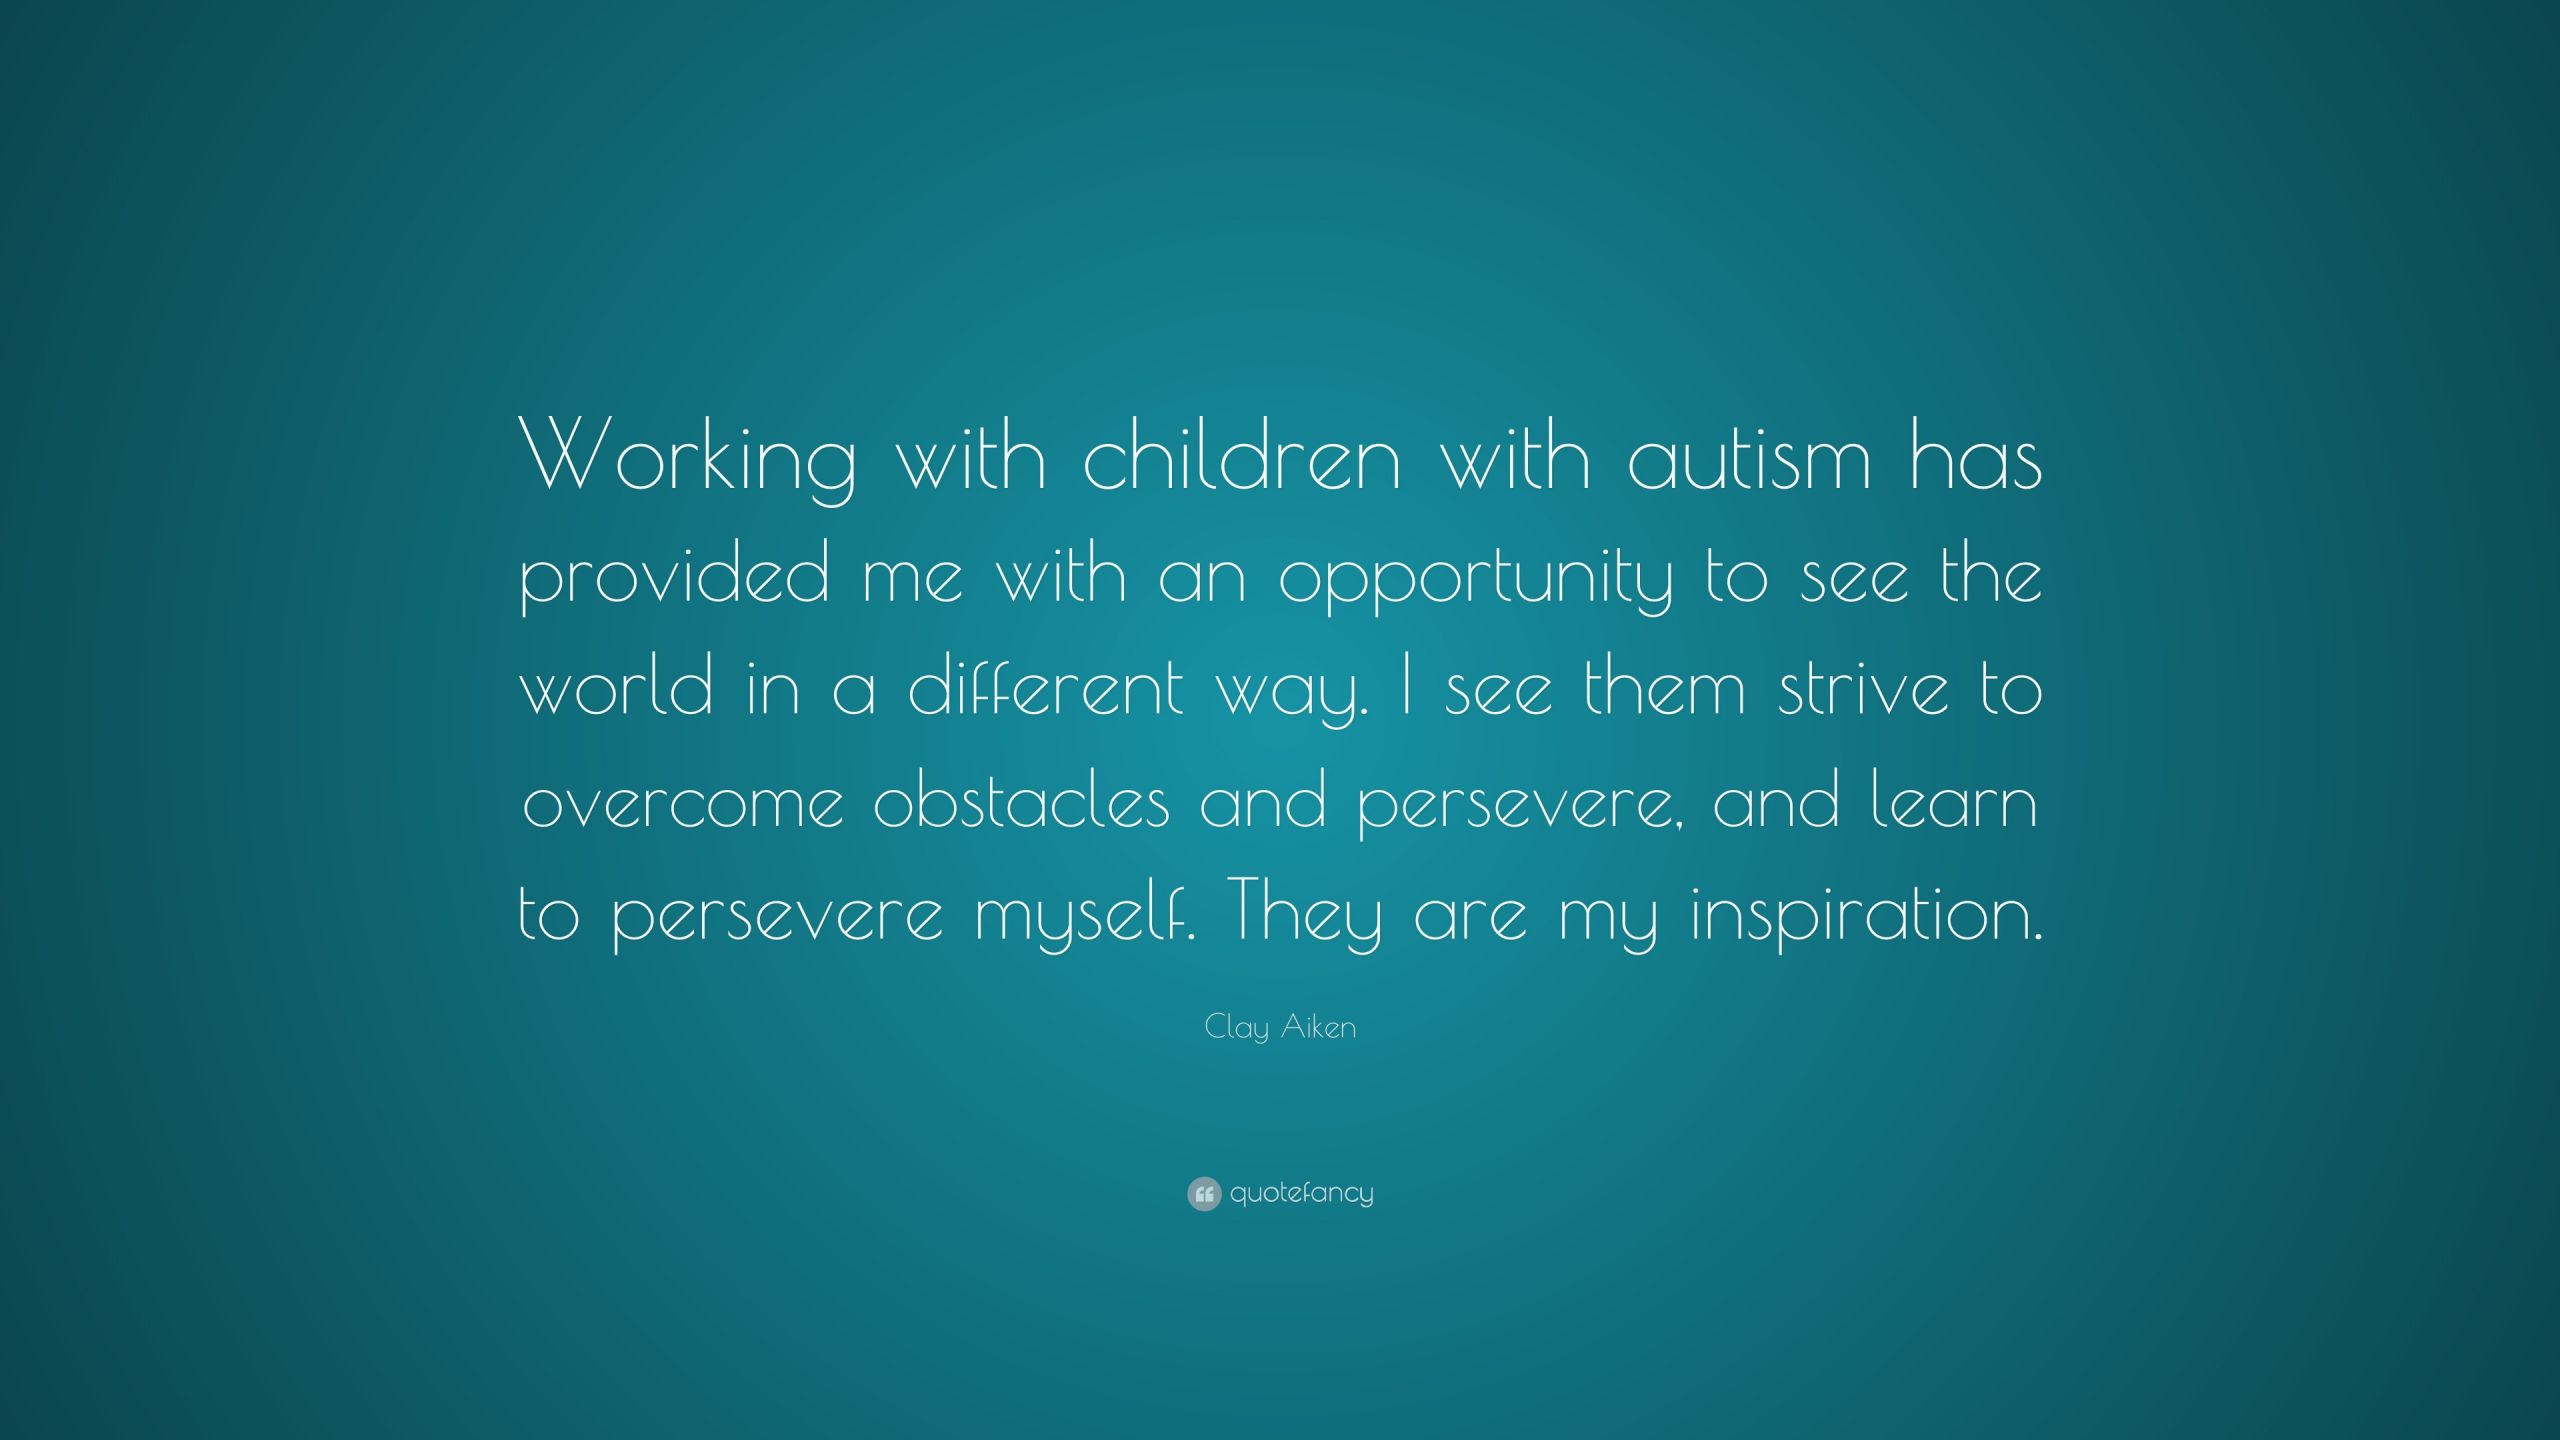 Working With Children Quotes
 Clay Aiken Quote “Working with children with autism has